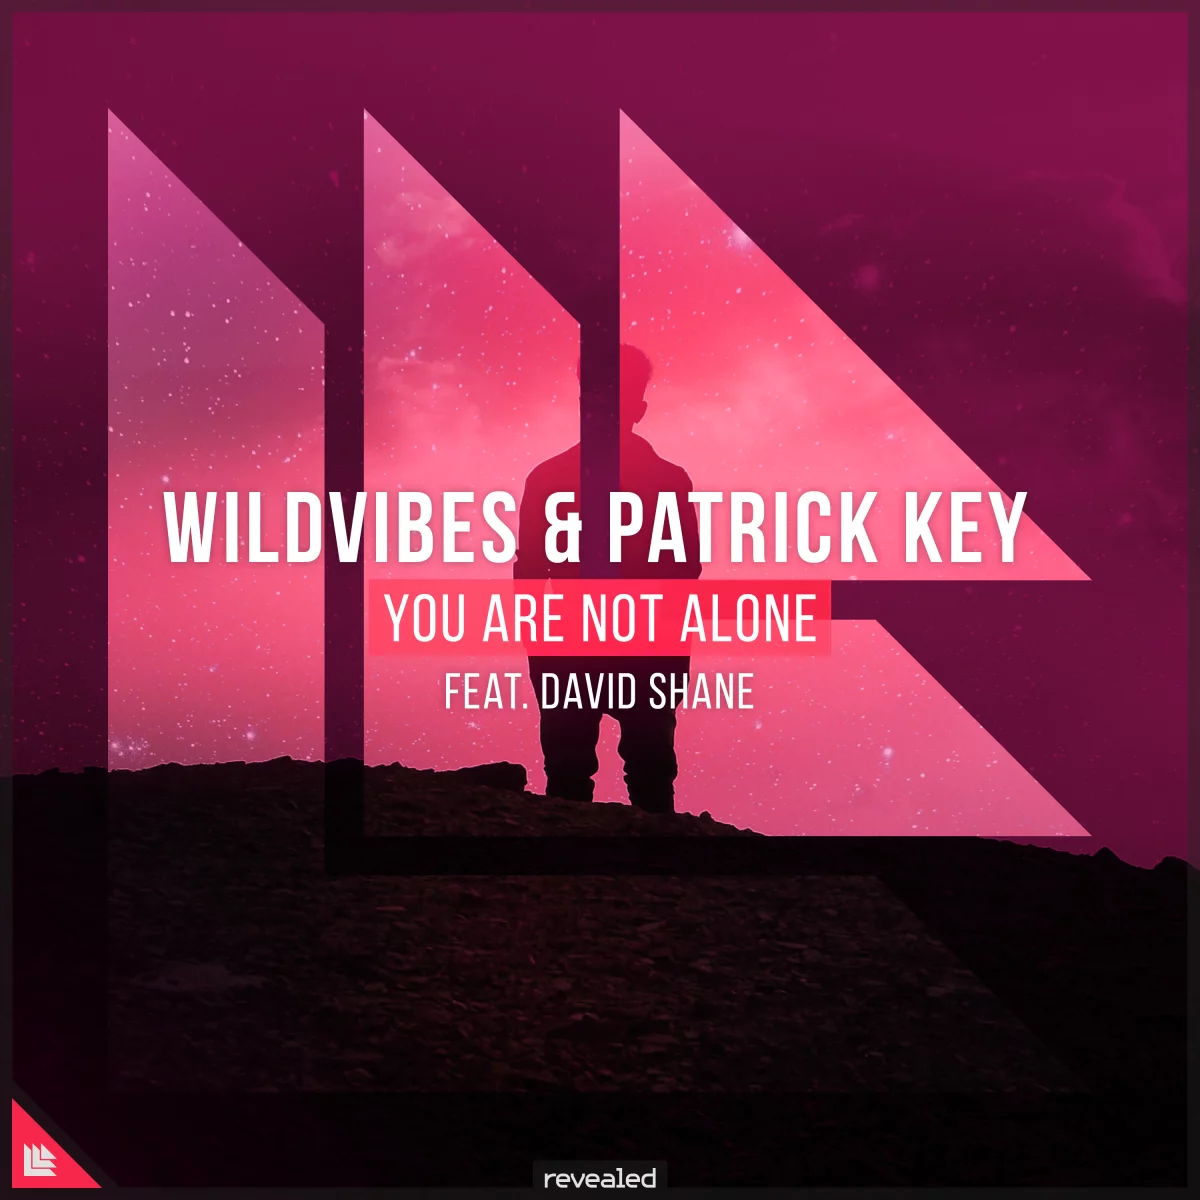 You Are Not Alone  - Wildvibes⁠ & Patrick Key⁠ ⁠feat. David Shane⁠ 